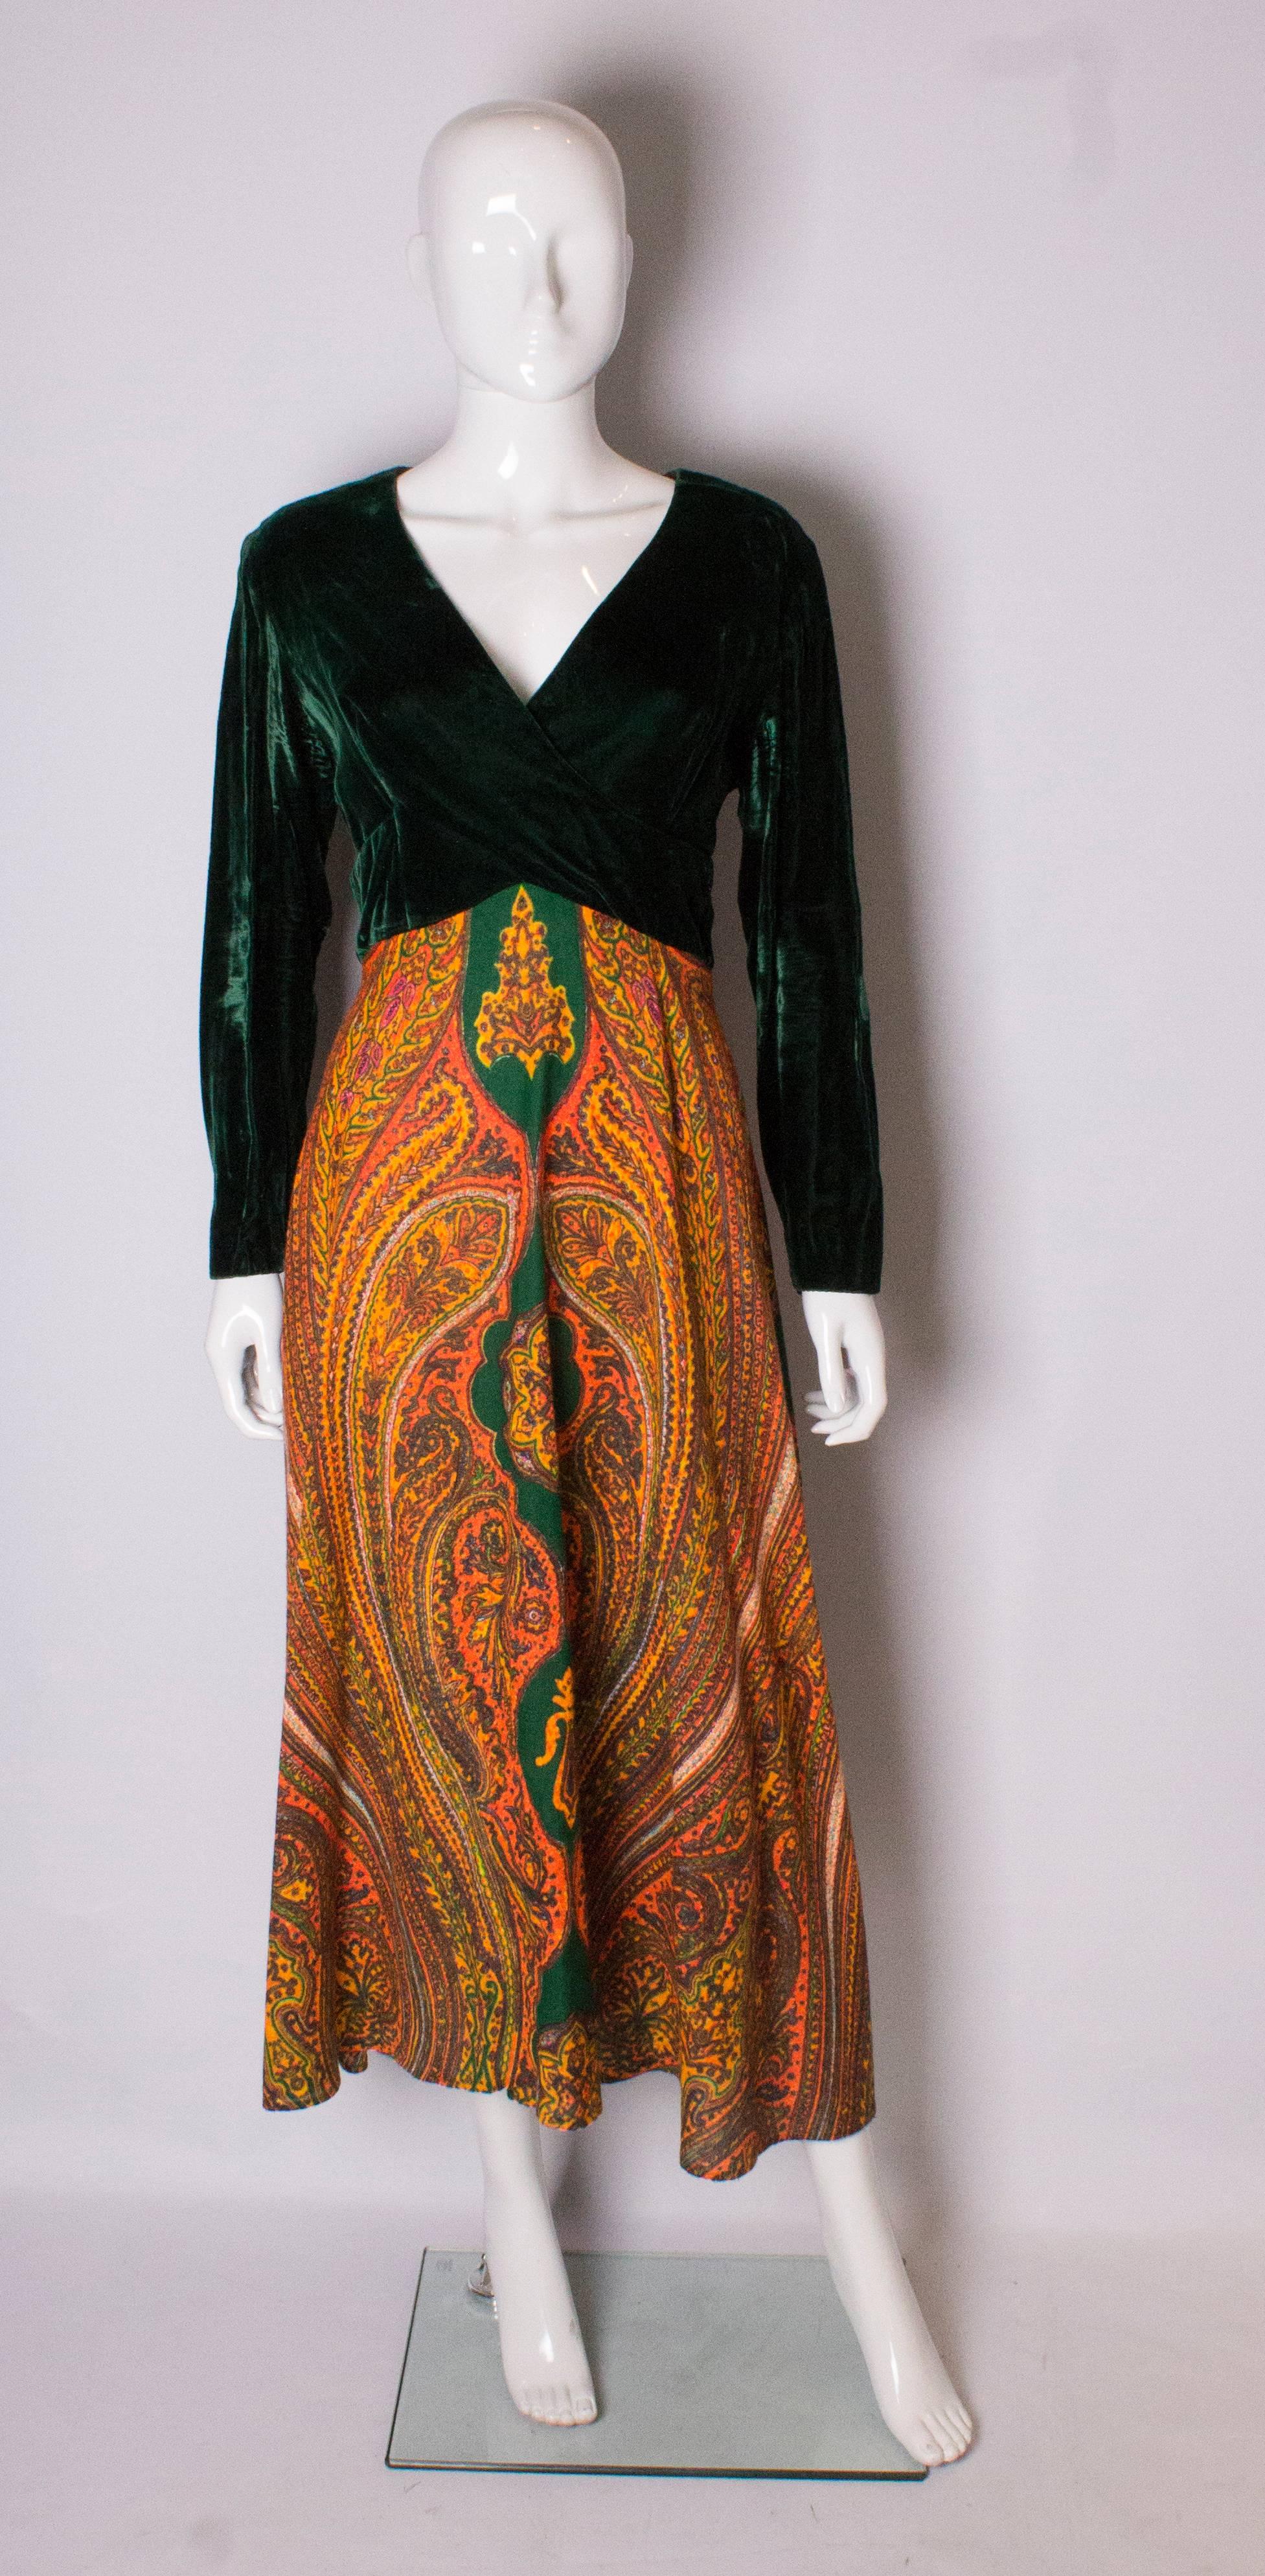 An easy to wear vintage gown. The dress has a green velvet top part with v cross over neckline.The skirt is an A line orange print.